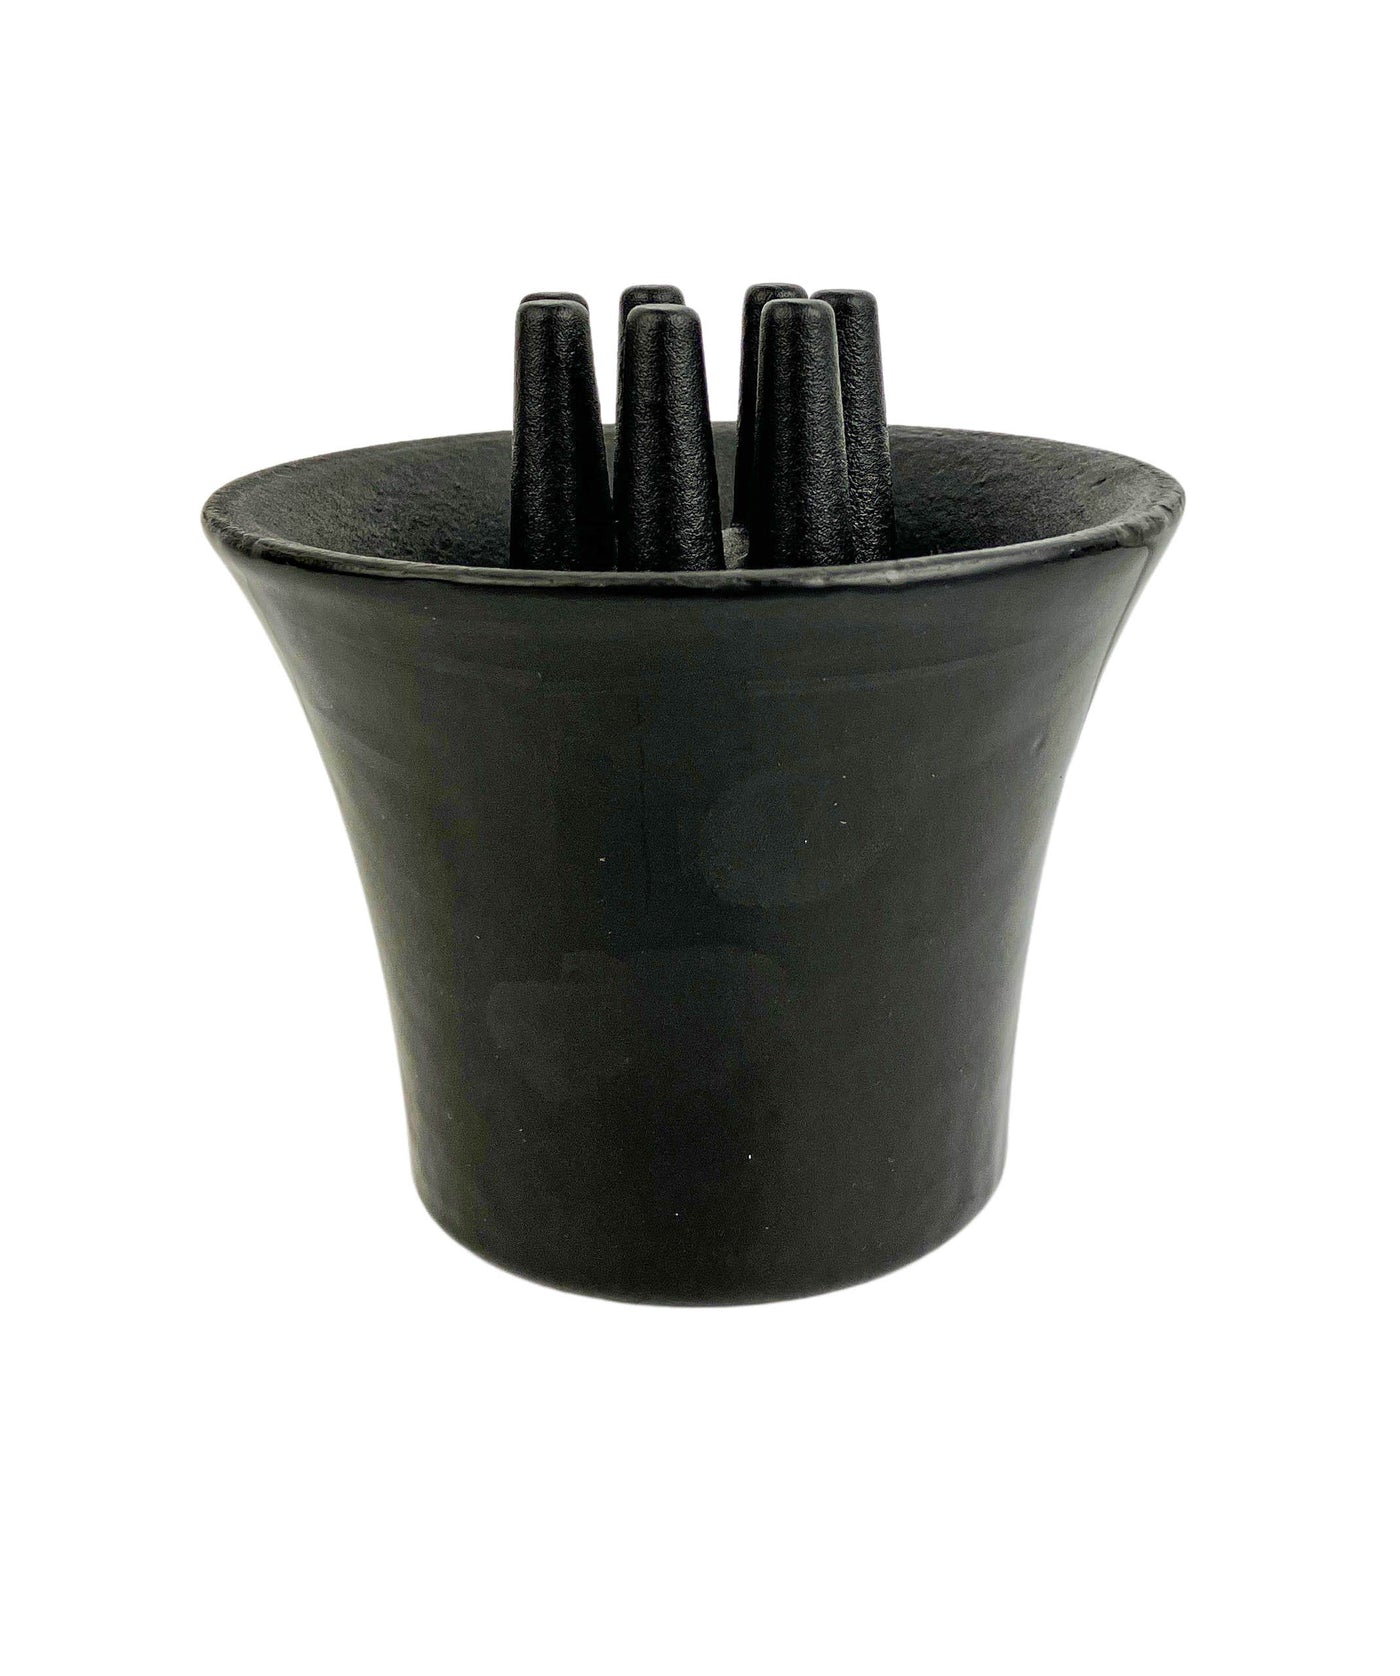 Cast Iron Spike Ashtray in Black - Discounts on Planthouse at UAL